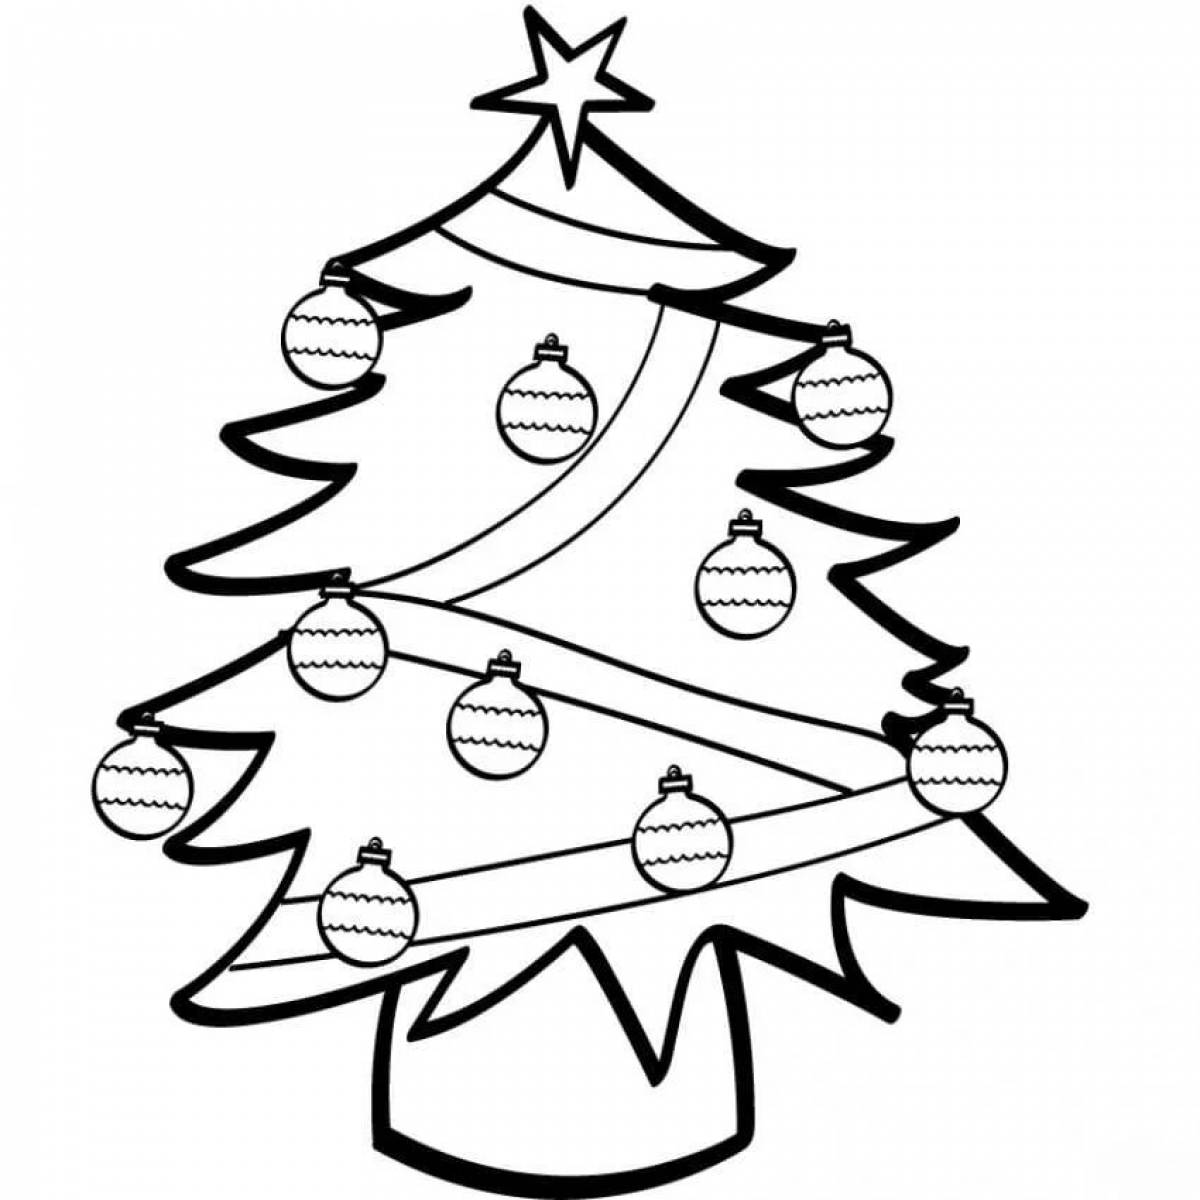 Christmas tree picture for kids #9